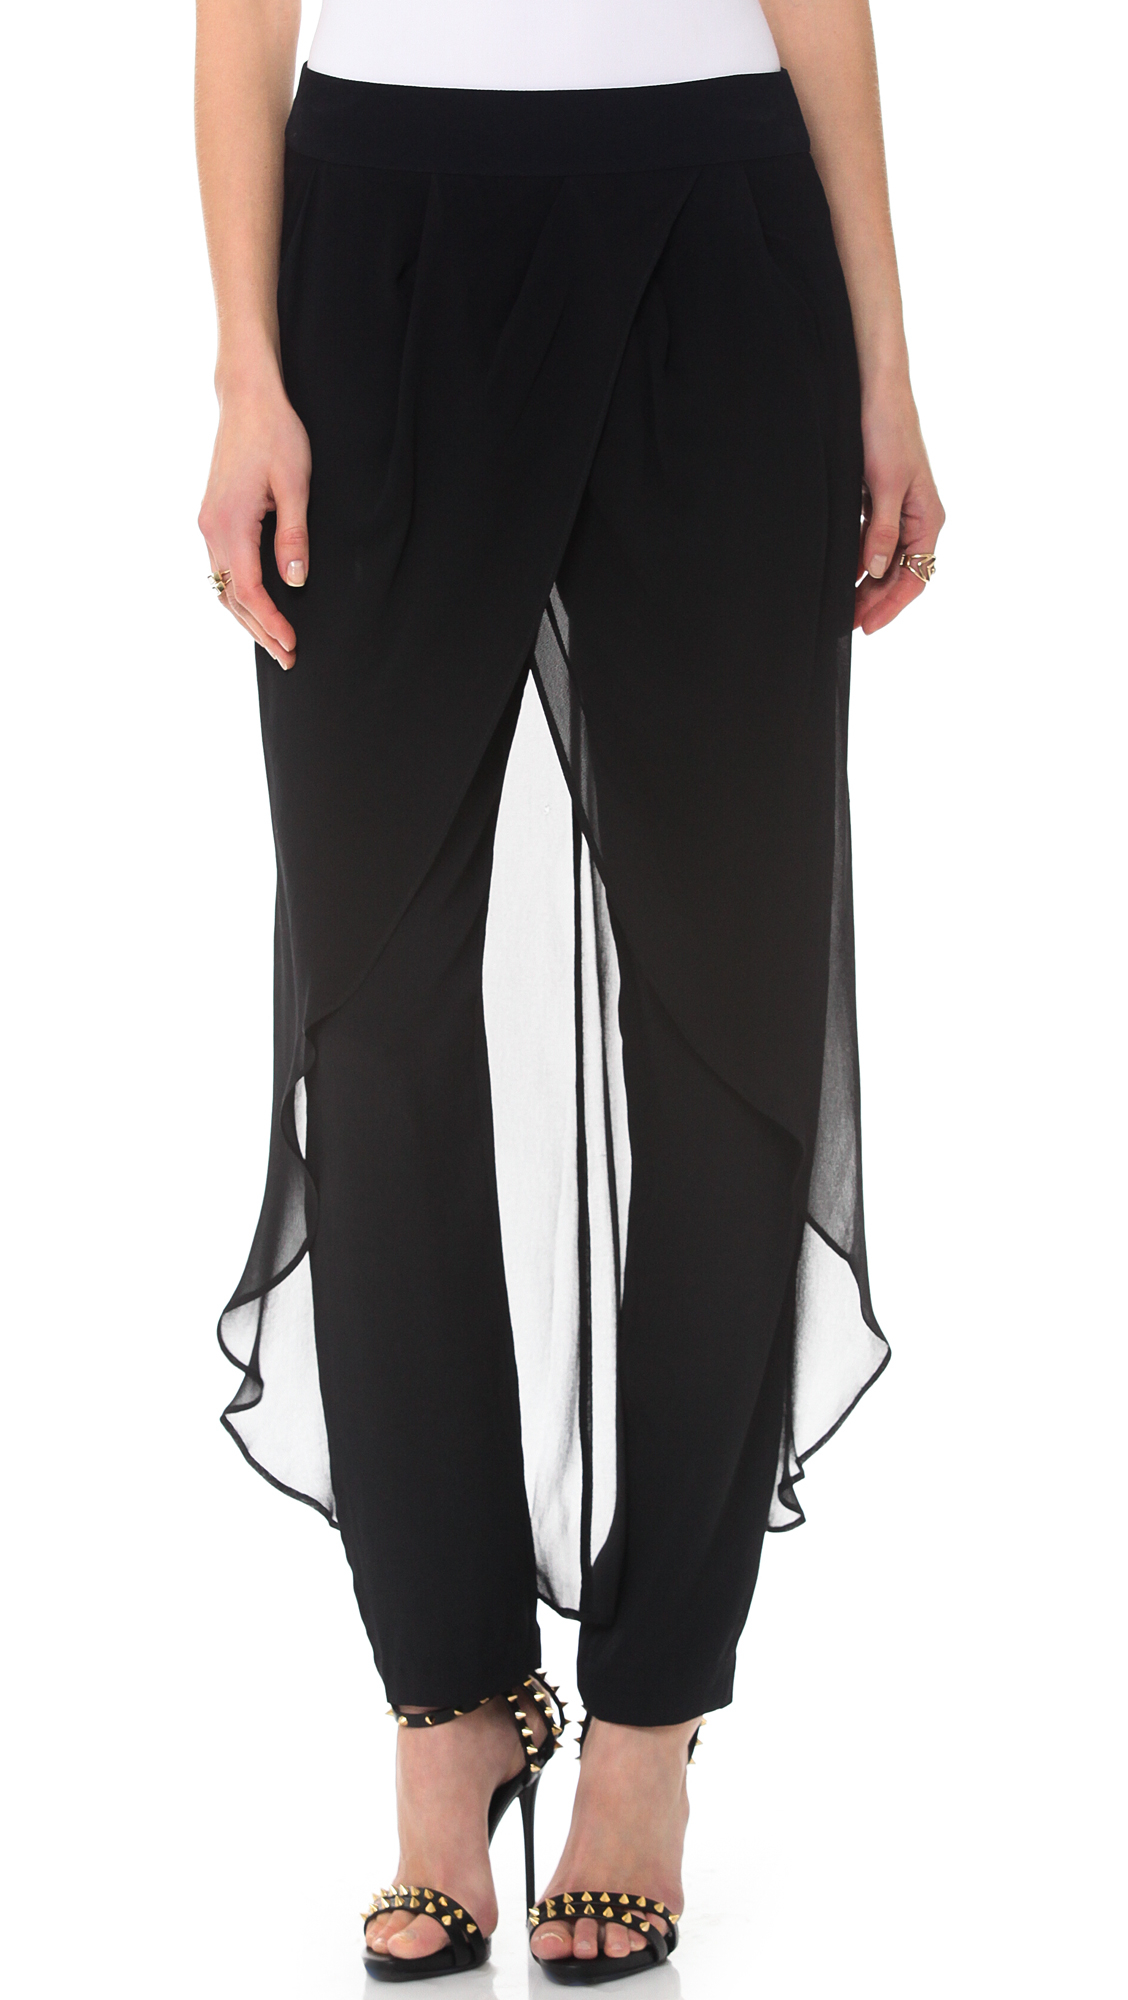 Lyst - Sass & bide The New Hope Pants in Black